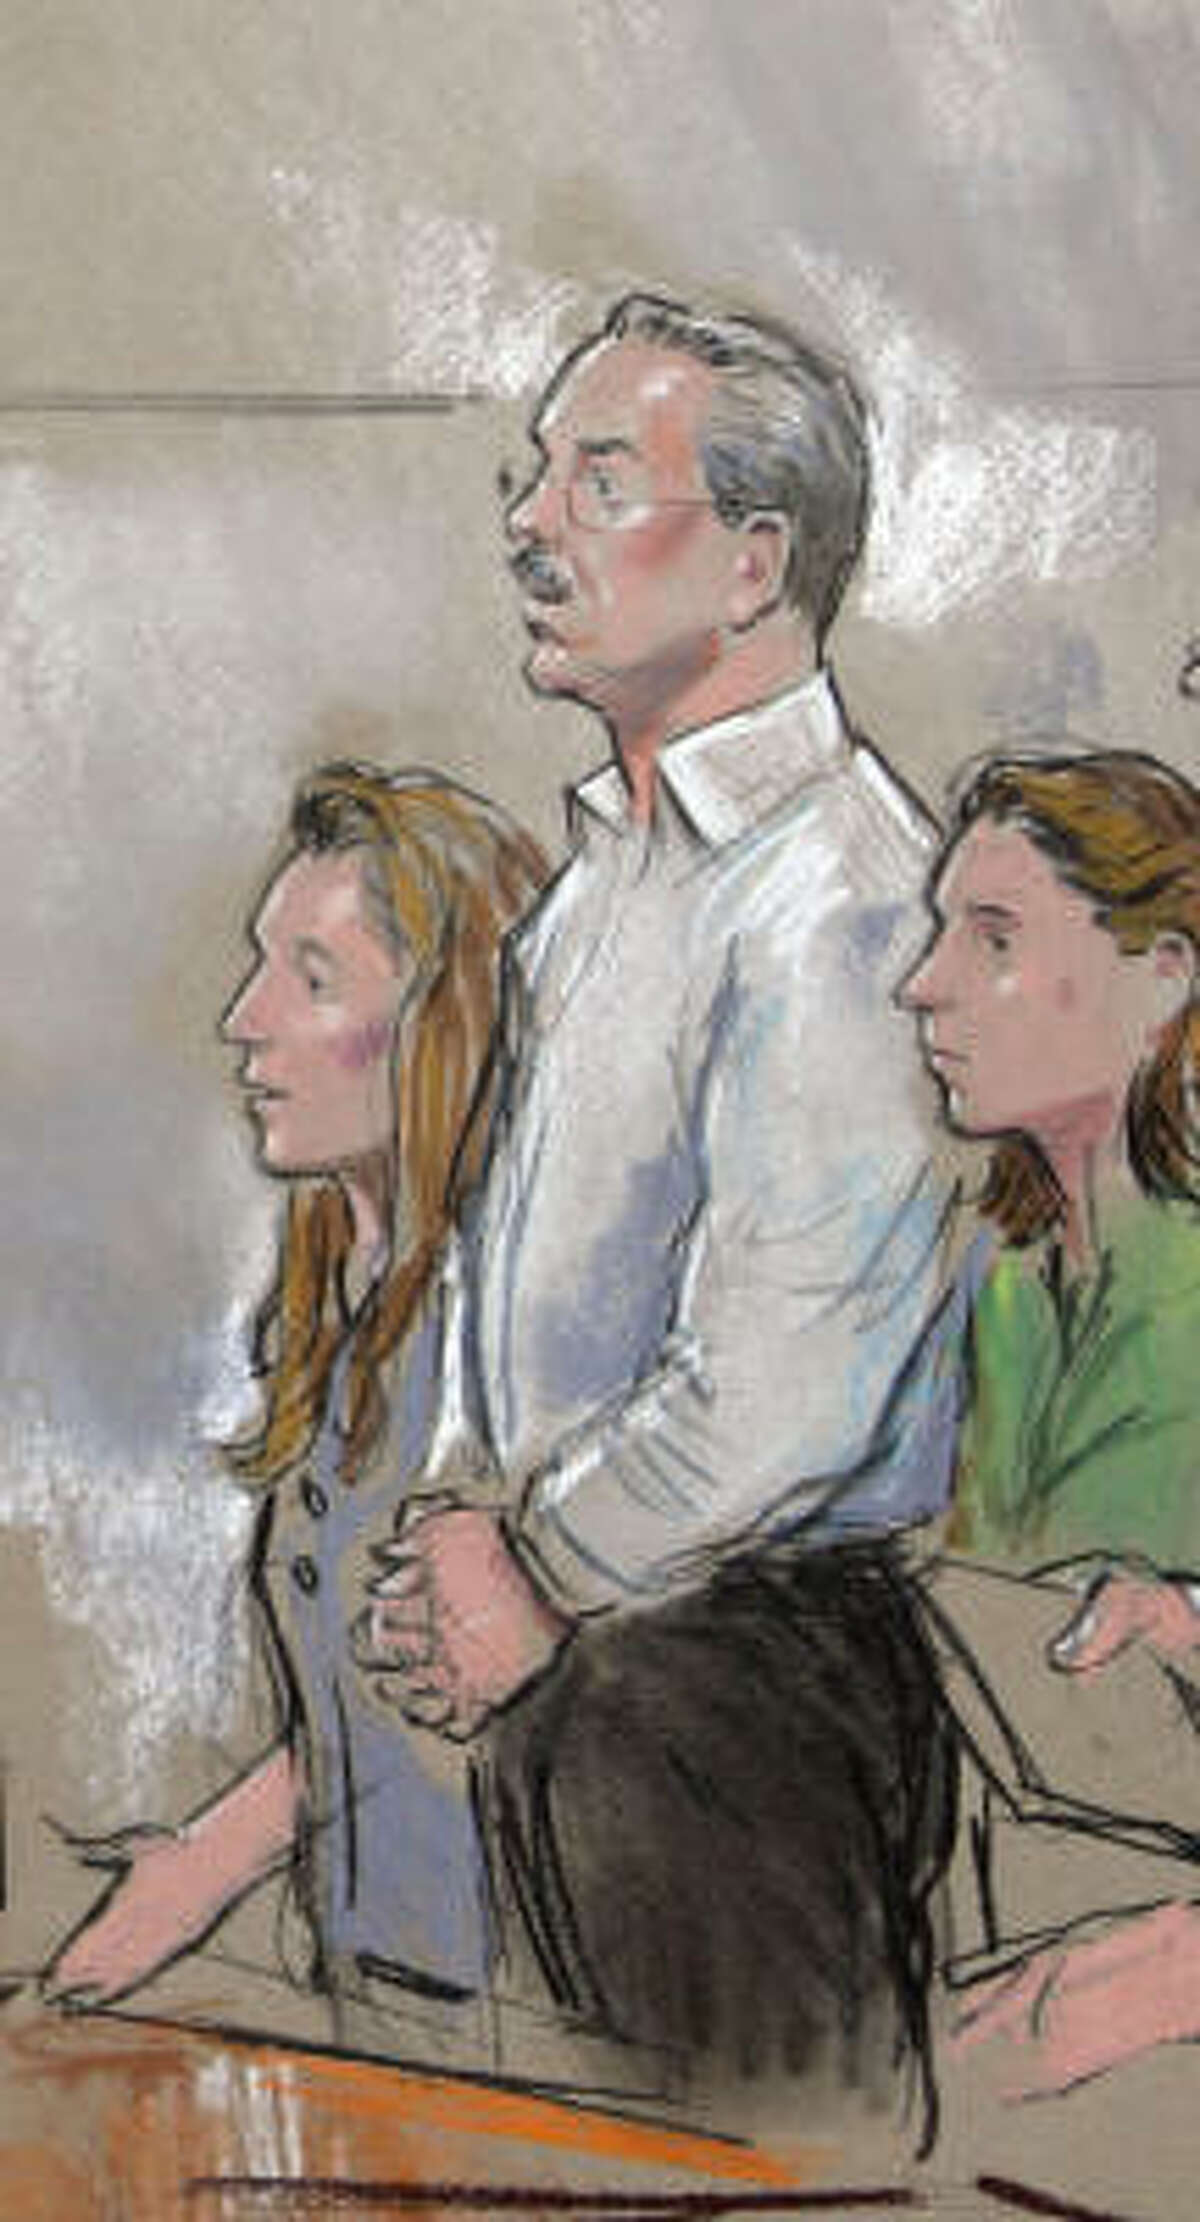 An artist's rendering shows Texas billionaire R. Allen Stanford at his Virginia court appearance.